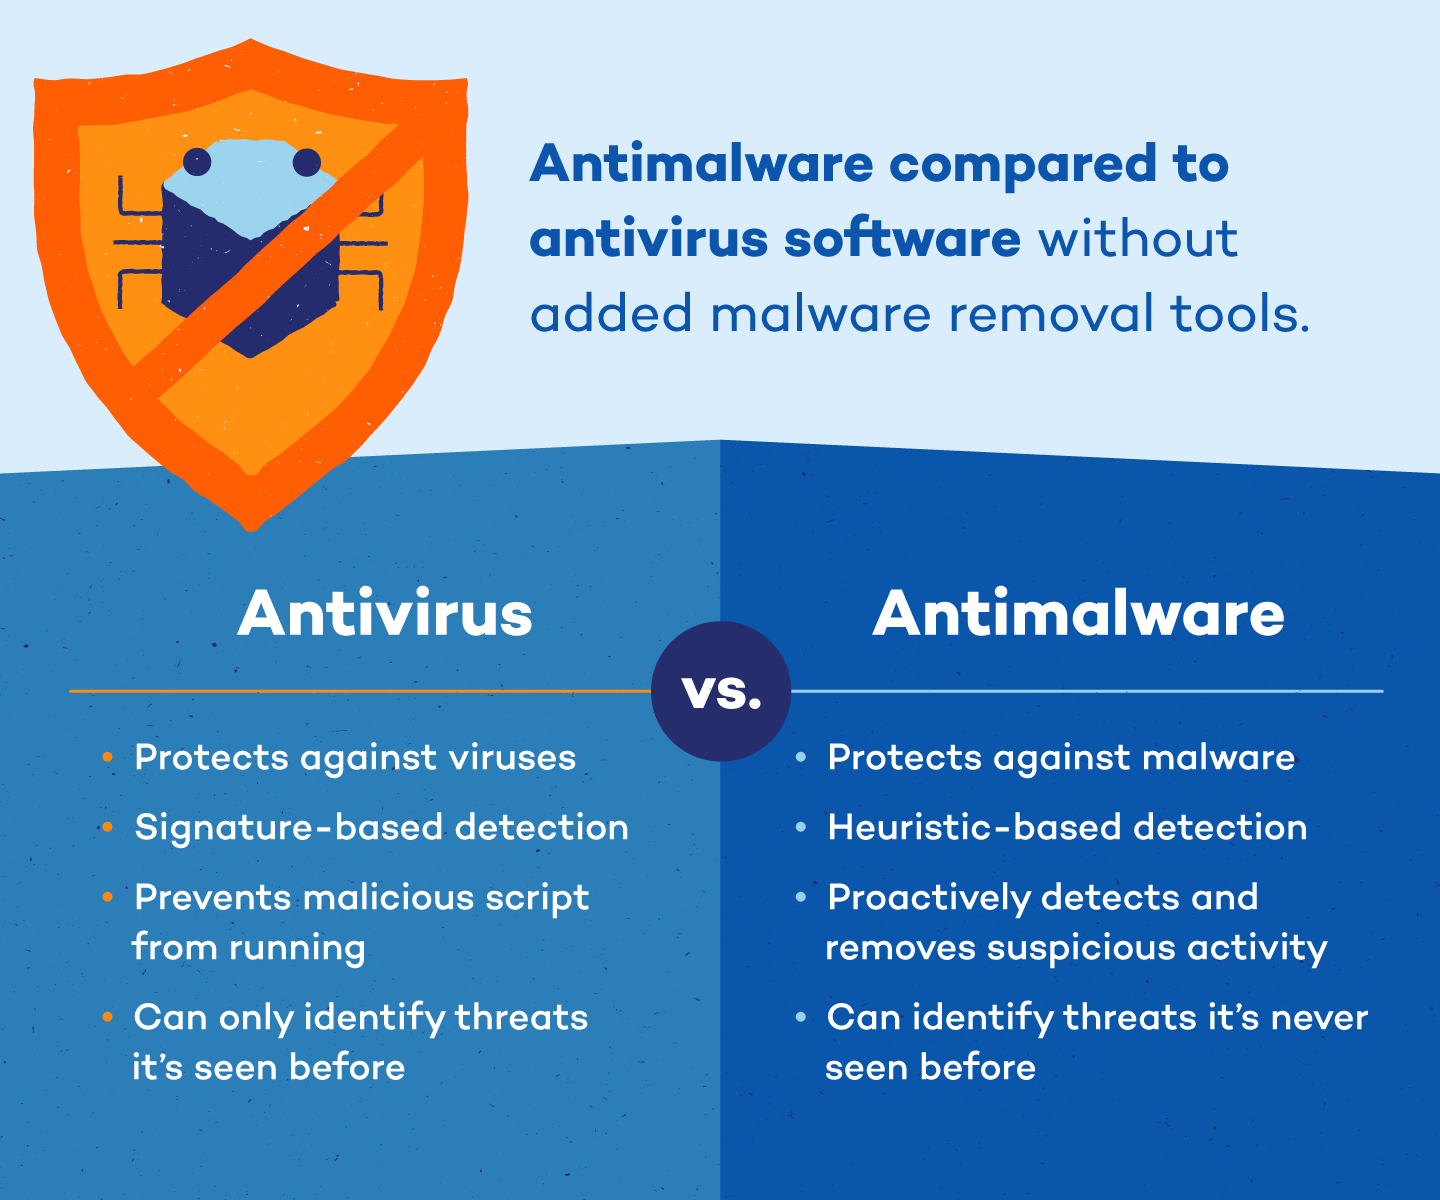 Install a reliable antivirus or anti-malware program if you don't have one already.
Update the antivirus program with the latest virus definitions.